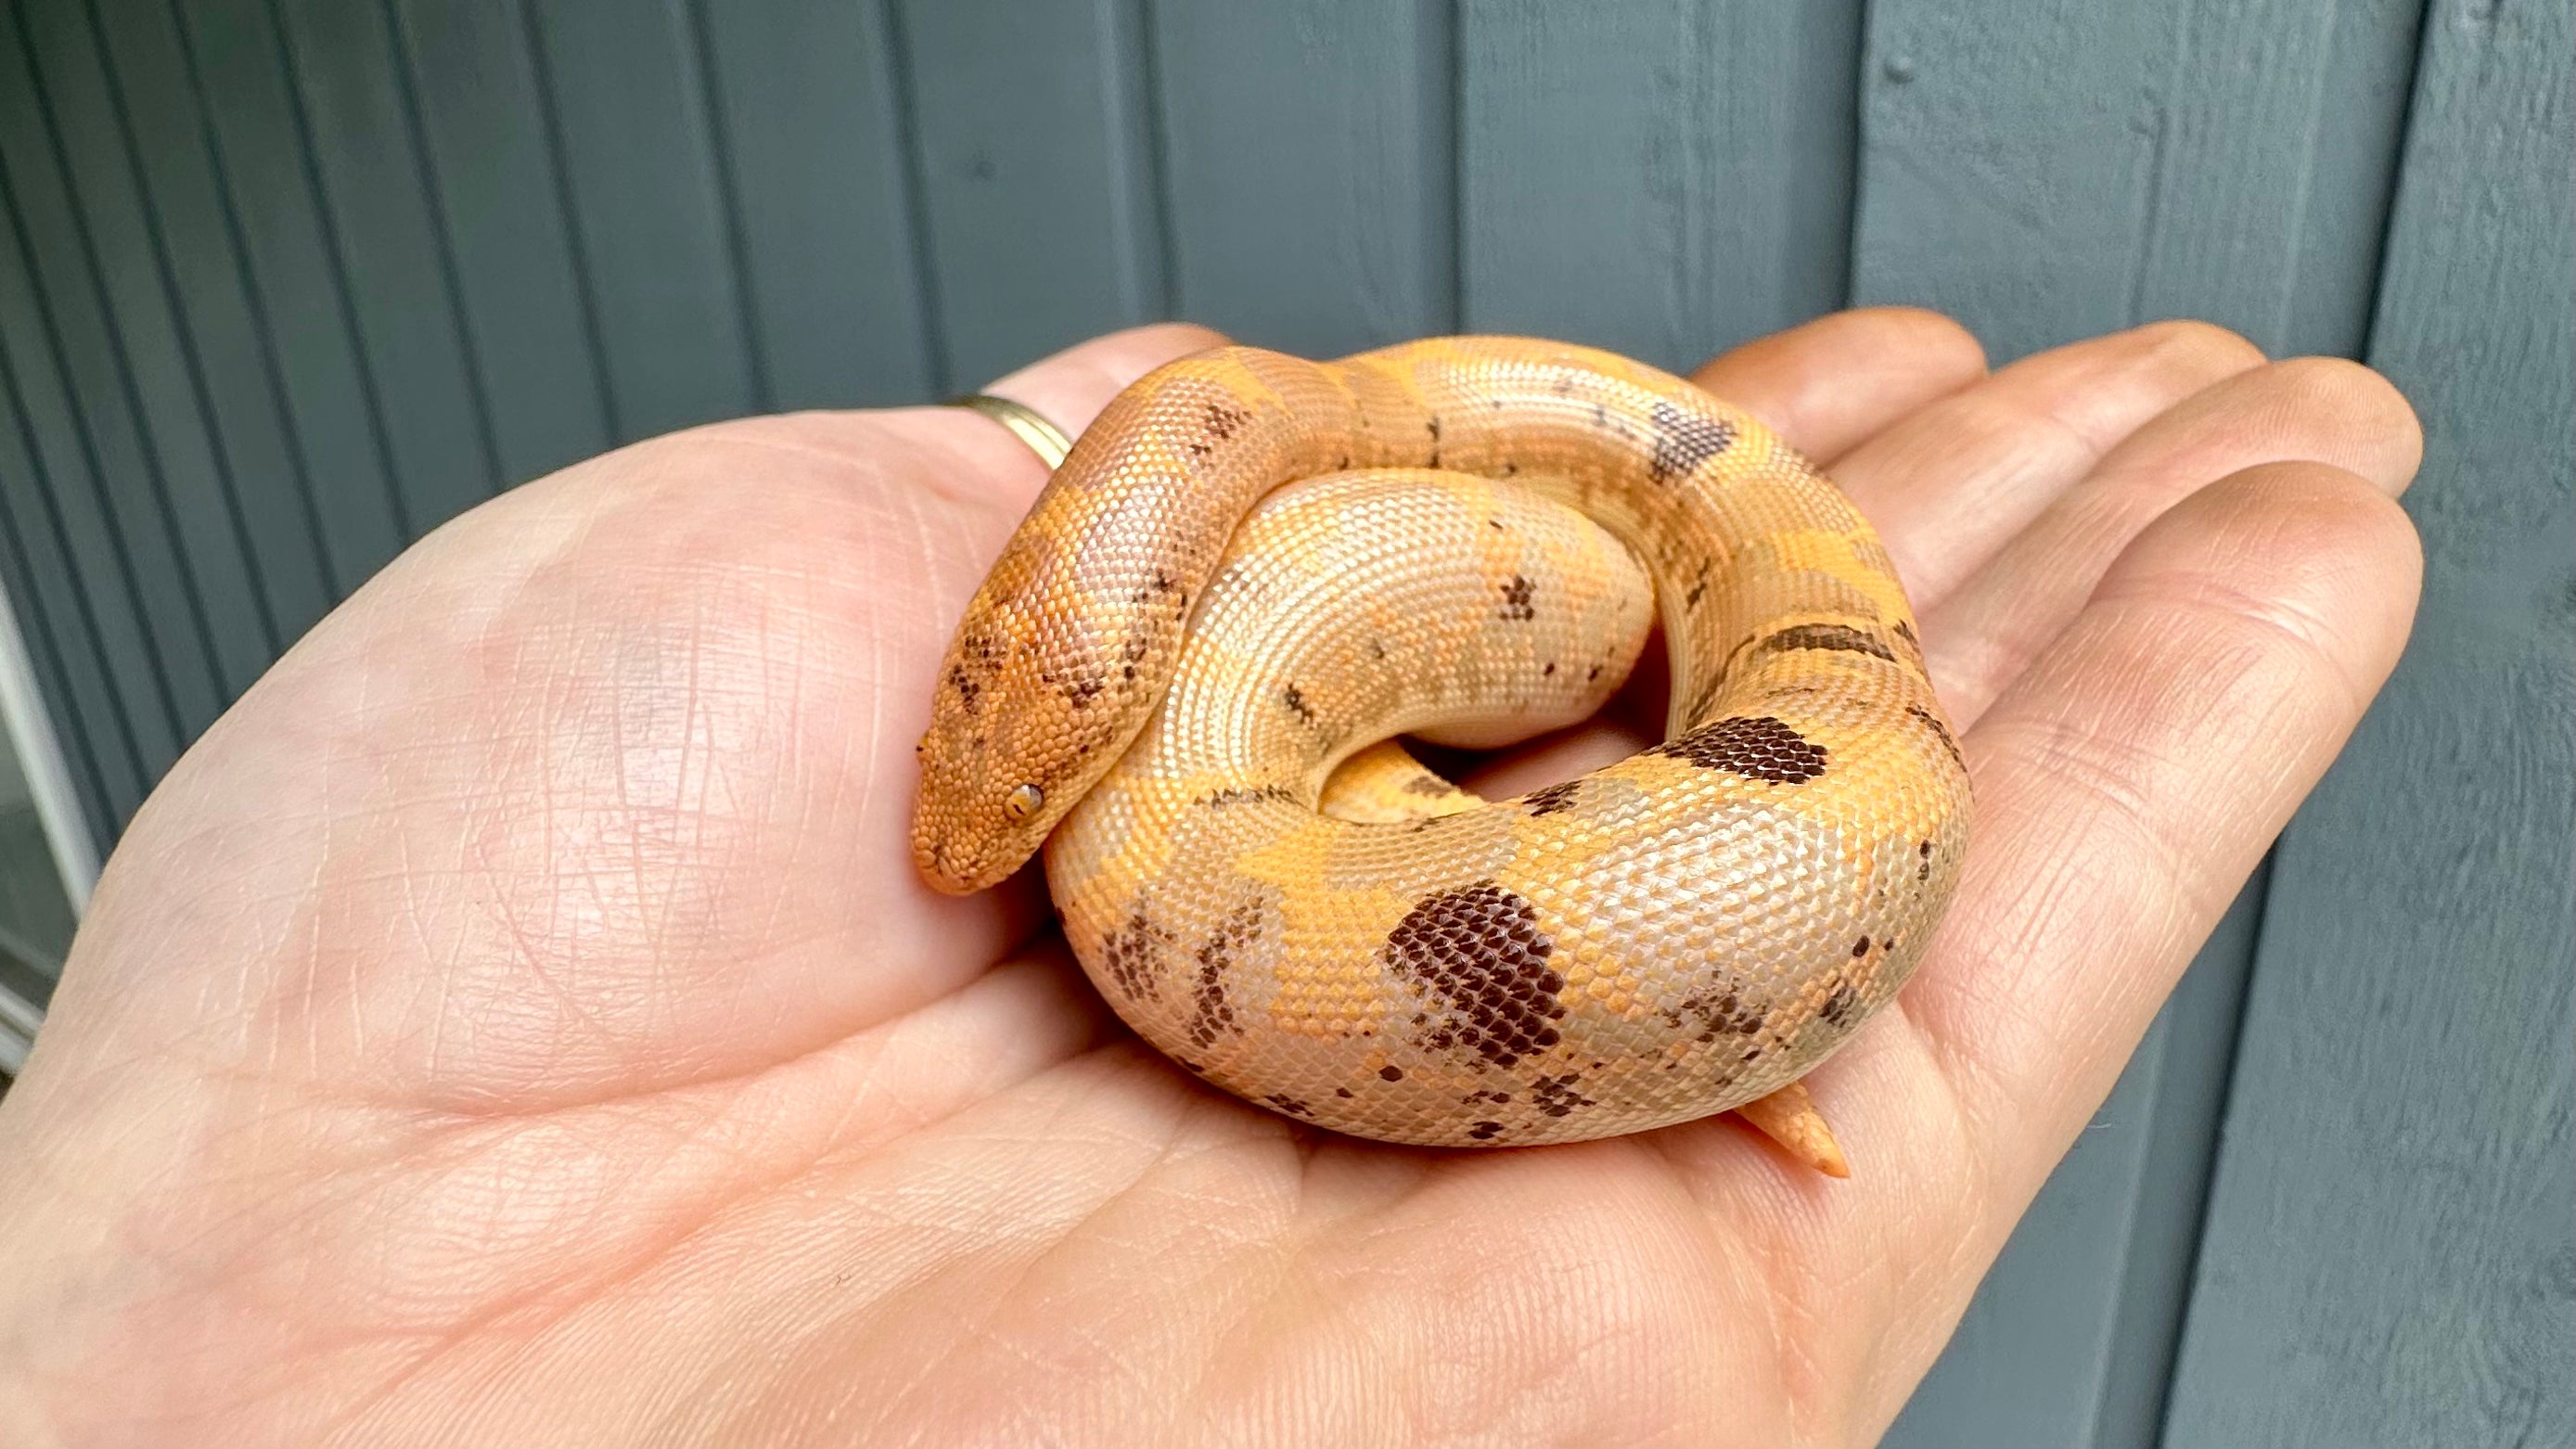 Luna, a paradox albino Kenyan sand boa is curled up and sitting in someone's palm.